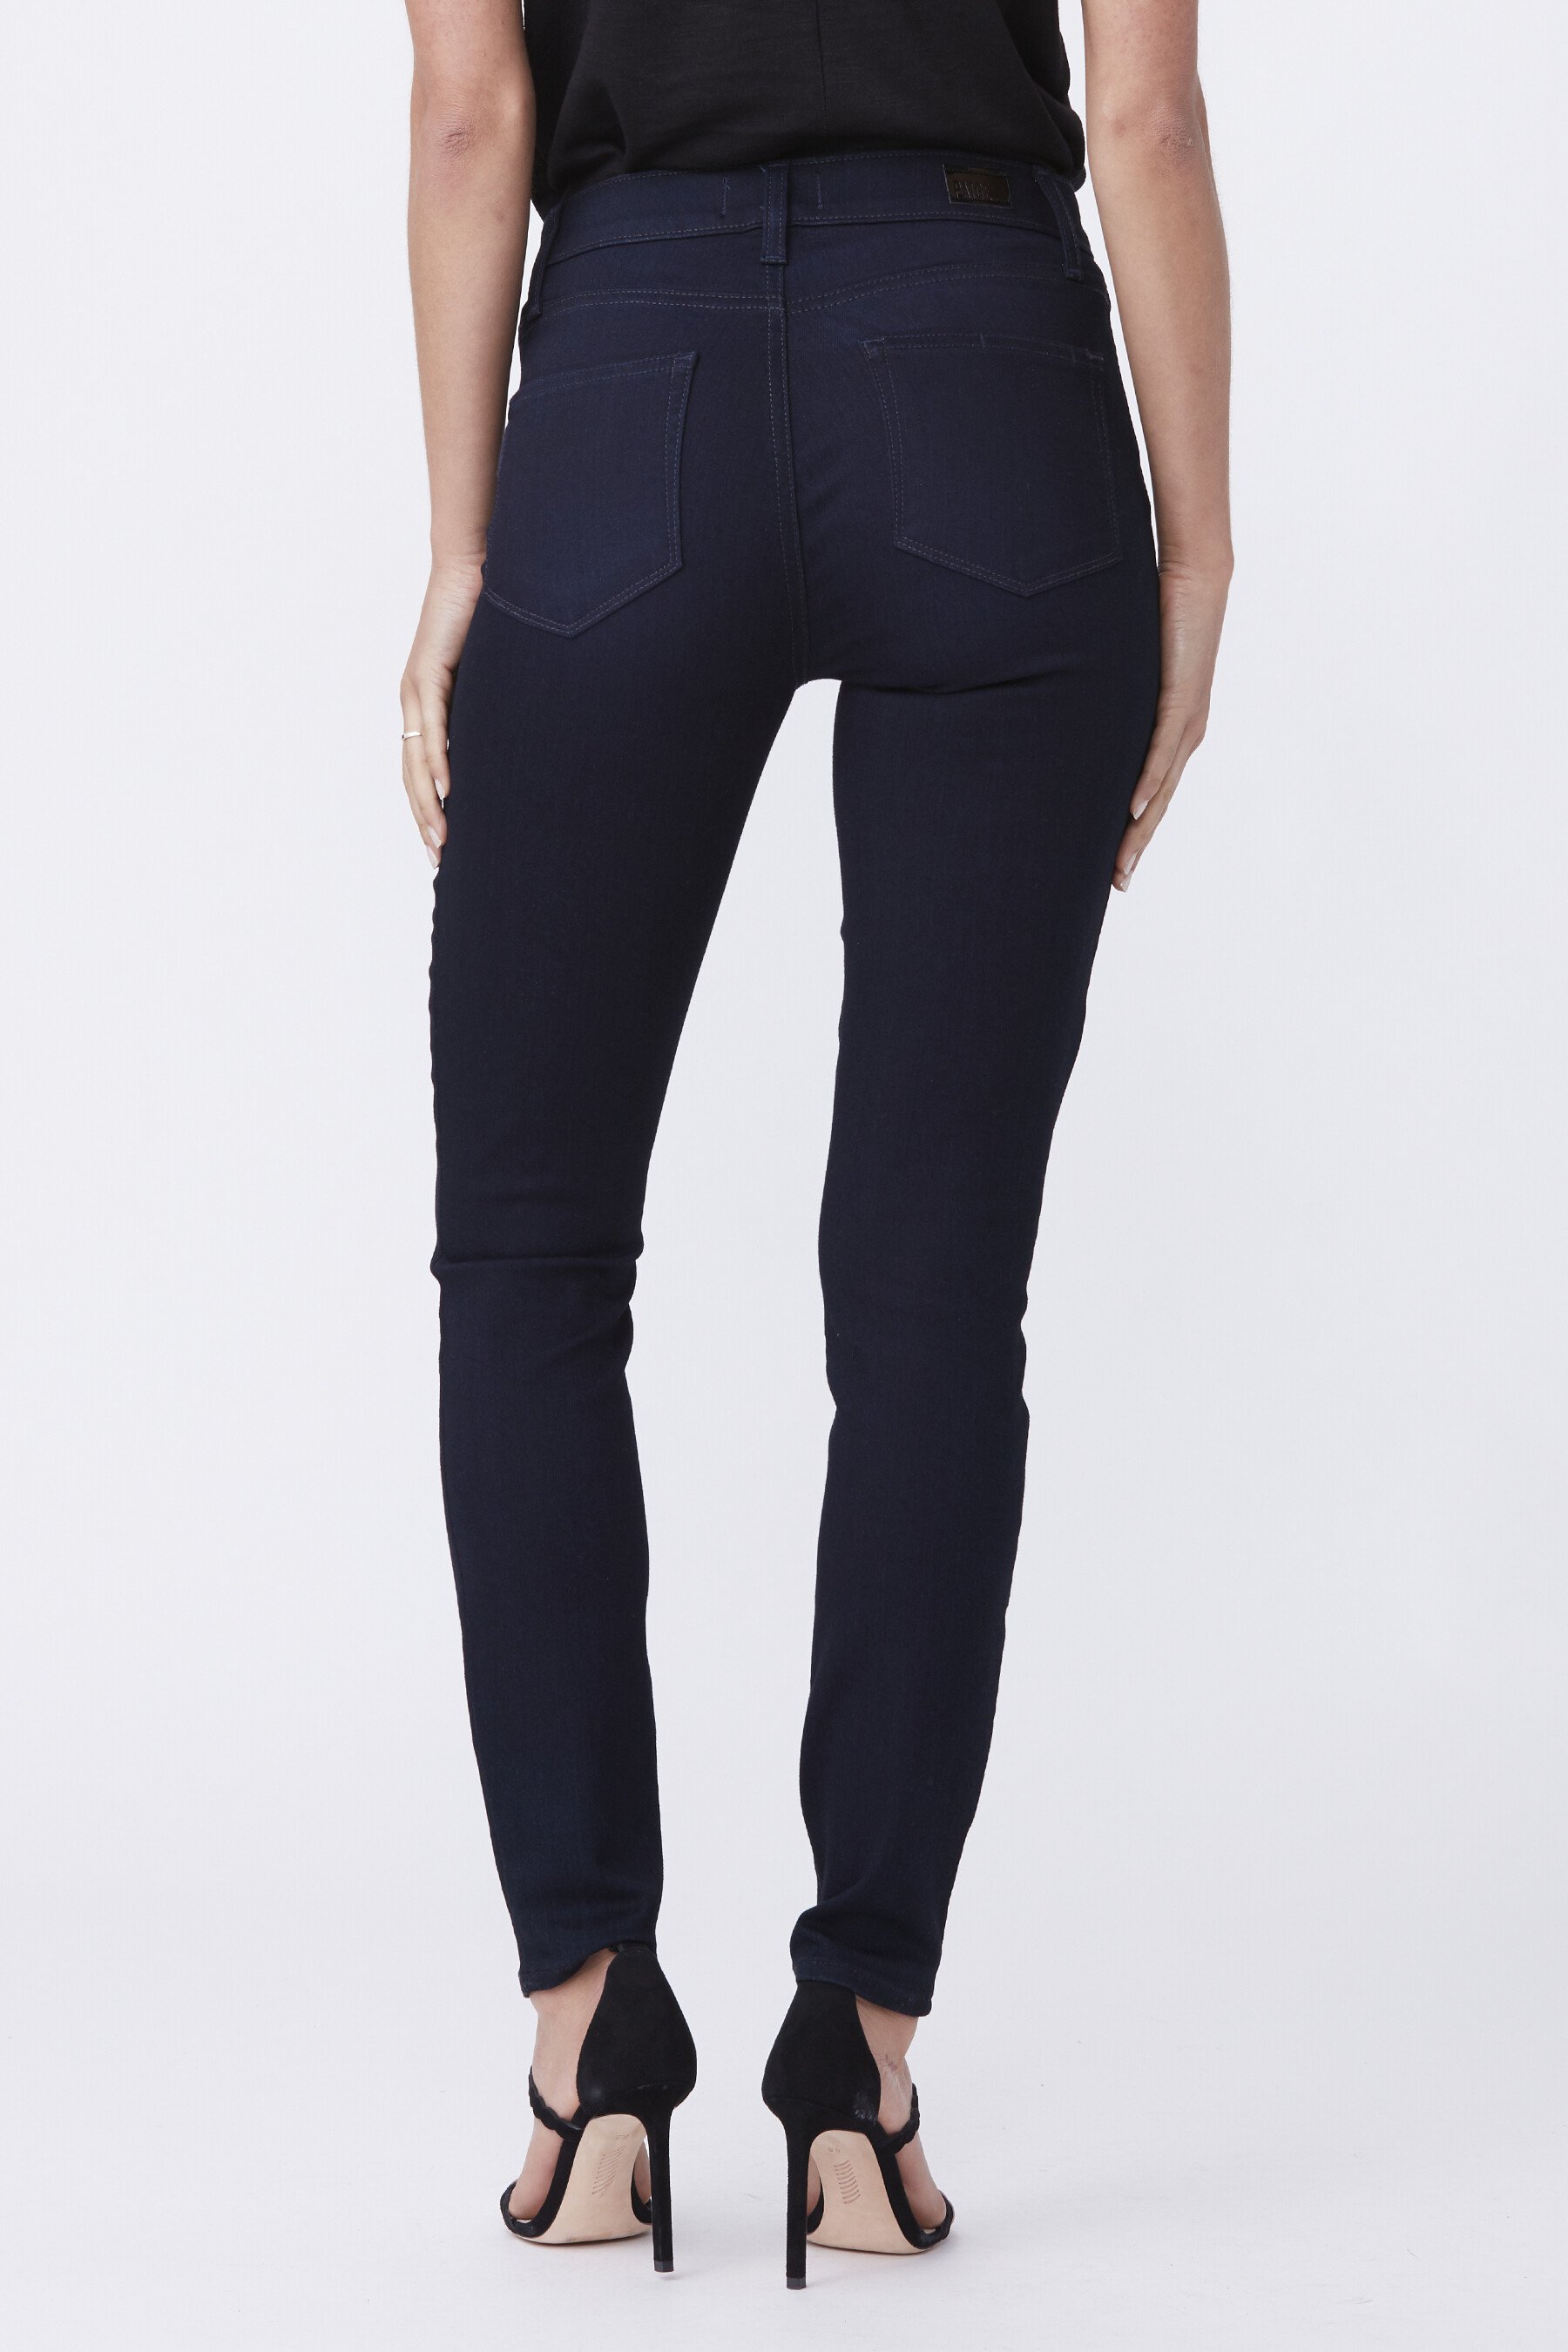 HOXTON ULTRA SKINNY JEAN (SEAS)- PAIGE WINTER 21 Boxing Day Sale